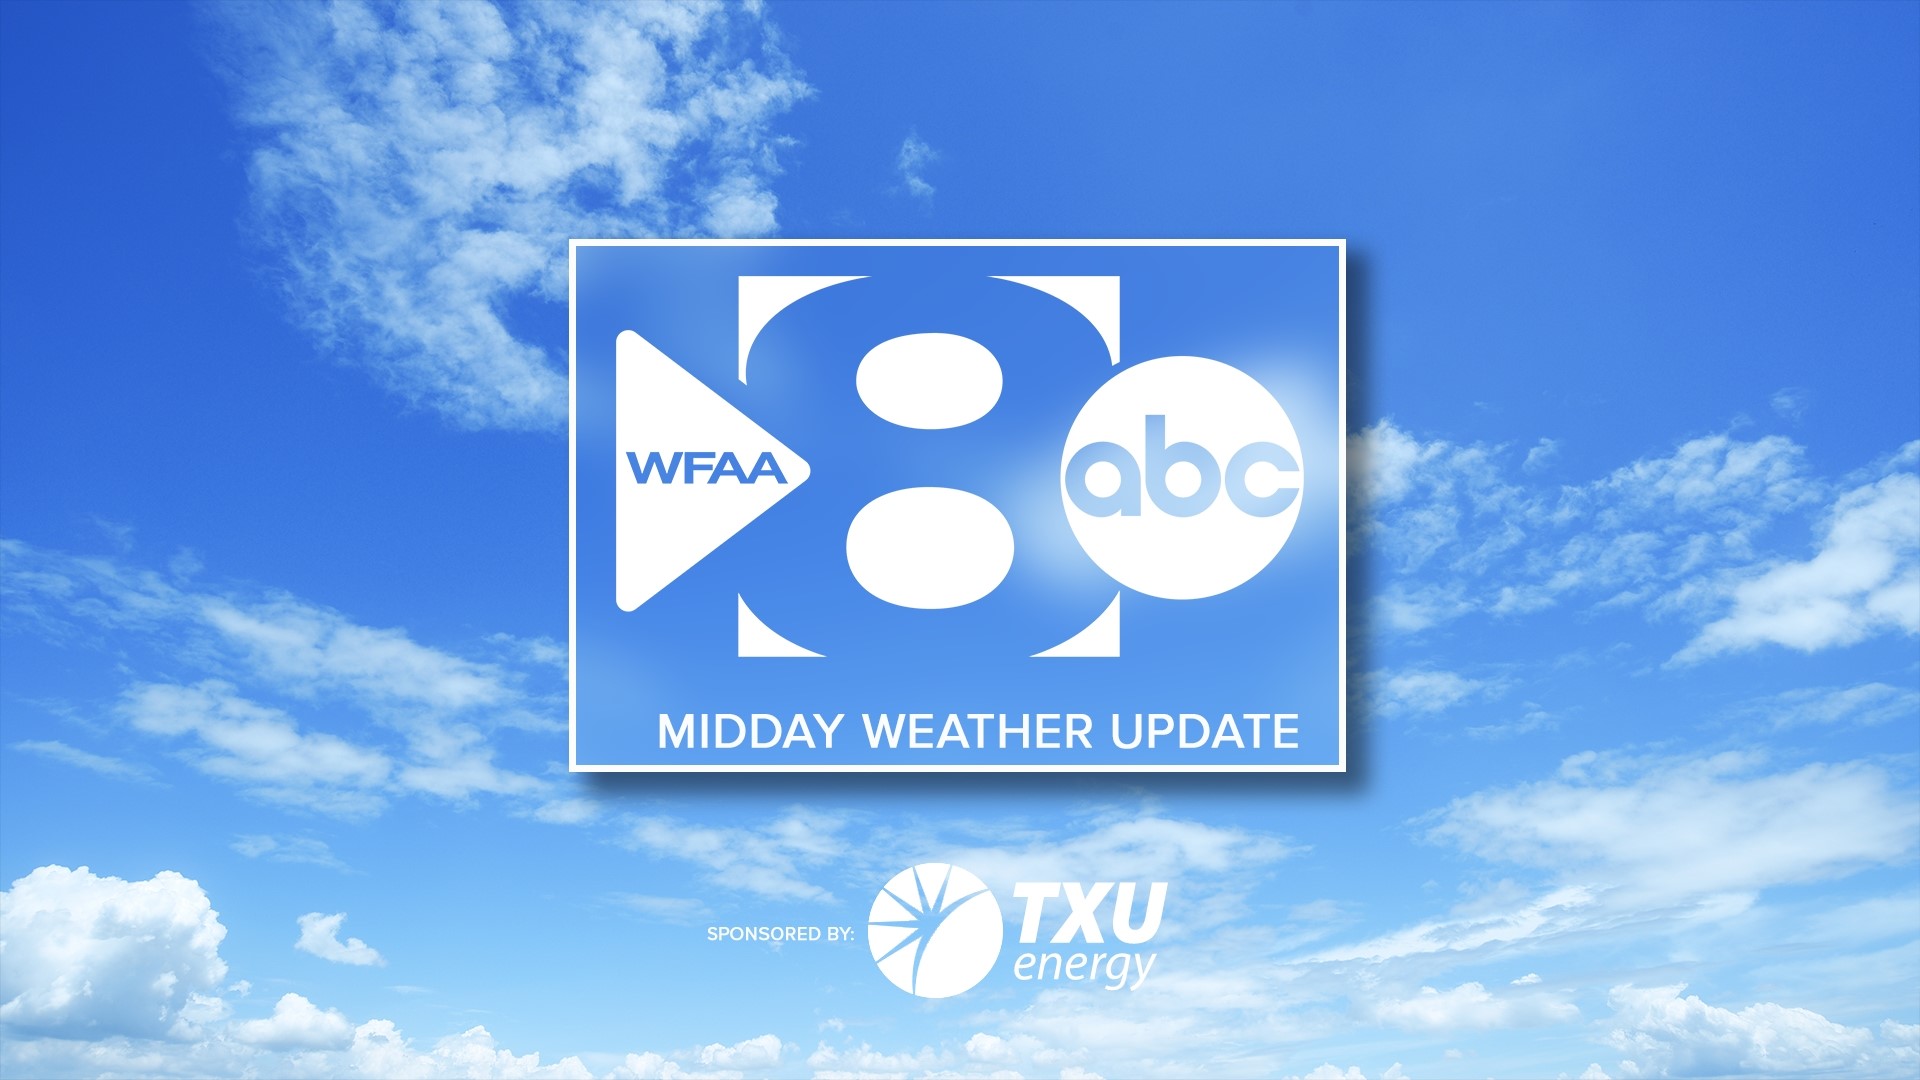 DFW Weather: July 22 midday forecast update